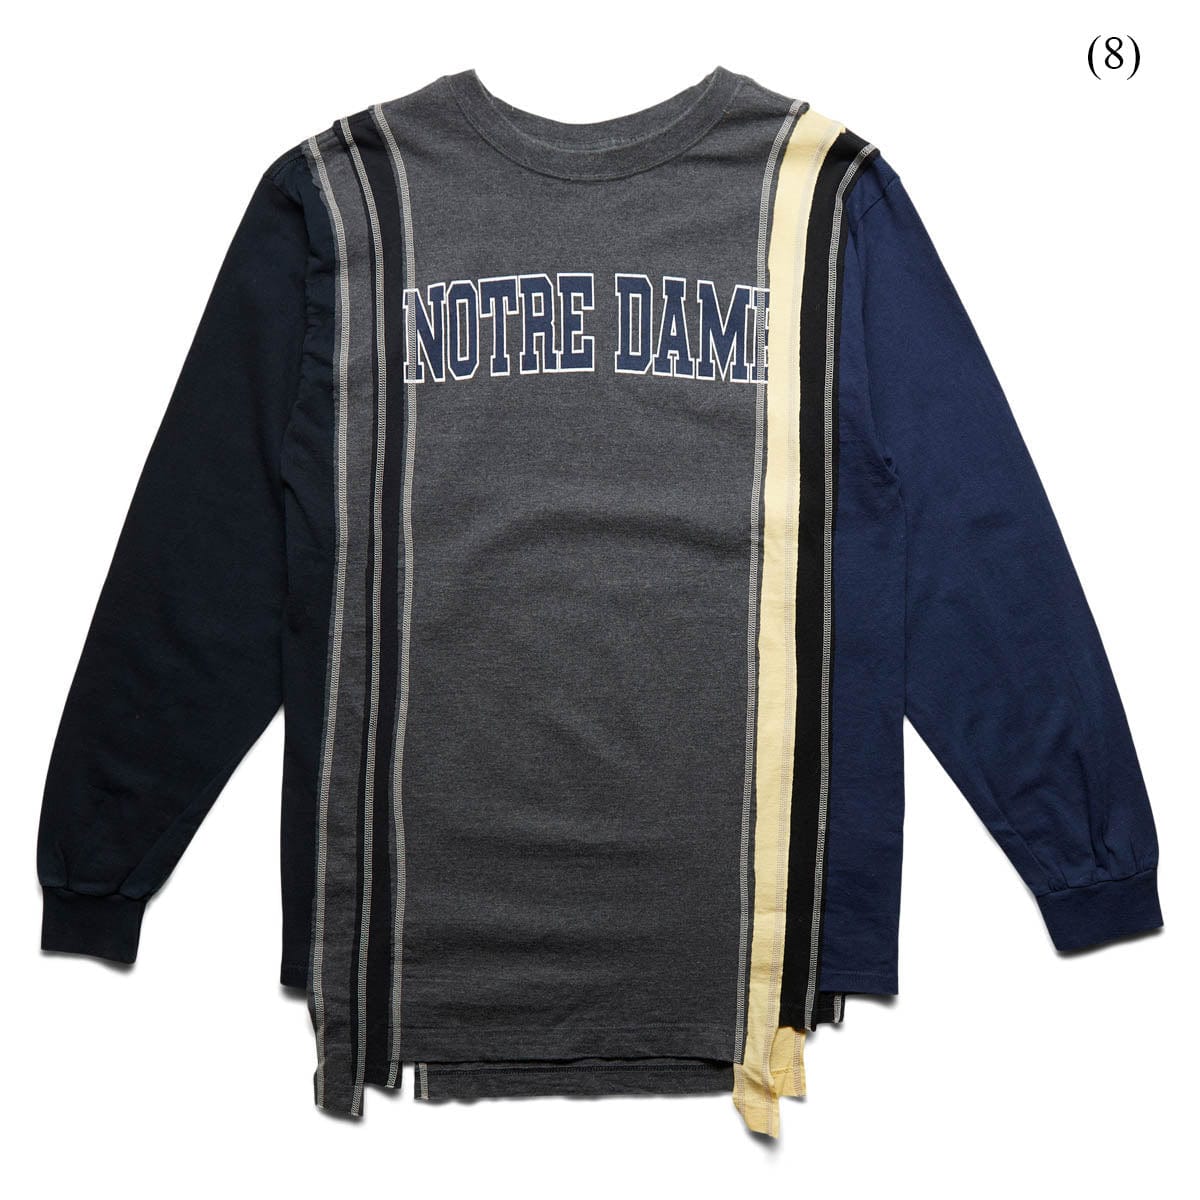 Needles 7 CUTS L/S TEE - Notre Dame COLLEGE SS22 (MEDIUM/MULTIPLE STYLES)